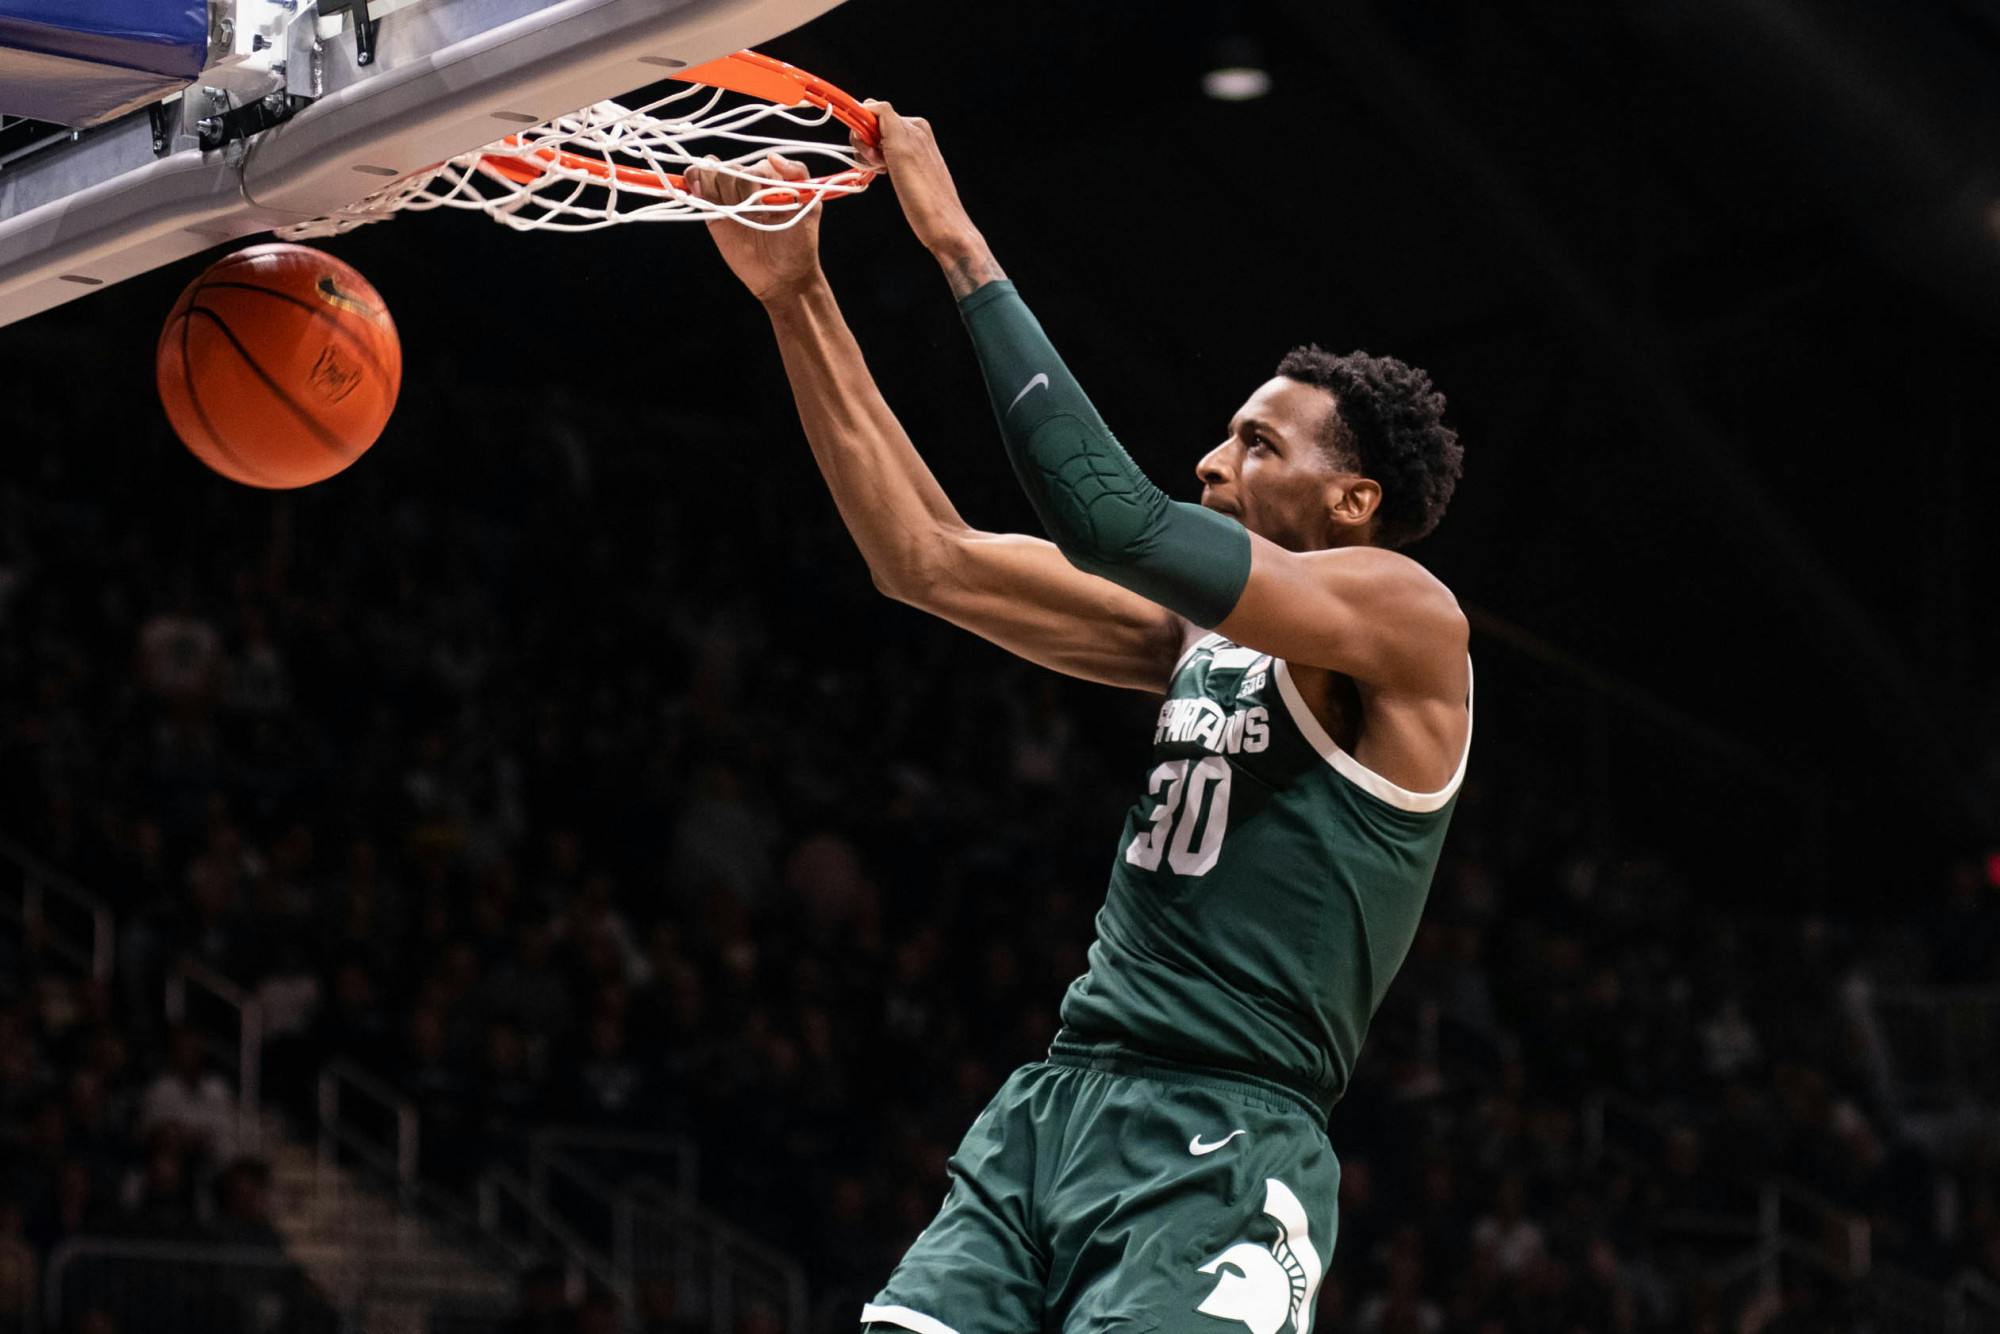 <p>Senior forward Marcus Bingham Jr. (30) makes a basket during the game against Butler on Nov. 17, 2021, at the Hinkler Fieldhouse. The Spartans defeated the Bulldogs 73-52. </p>